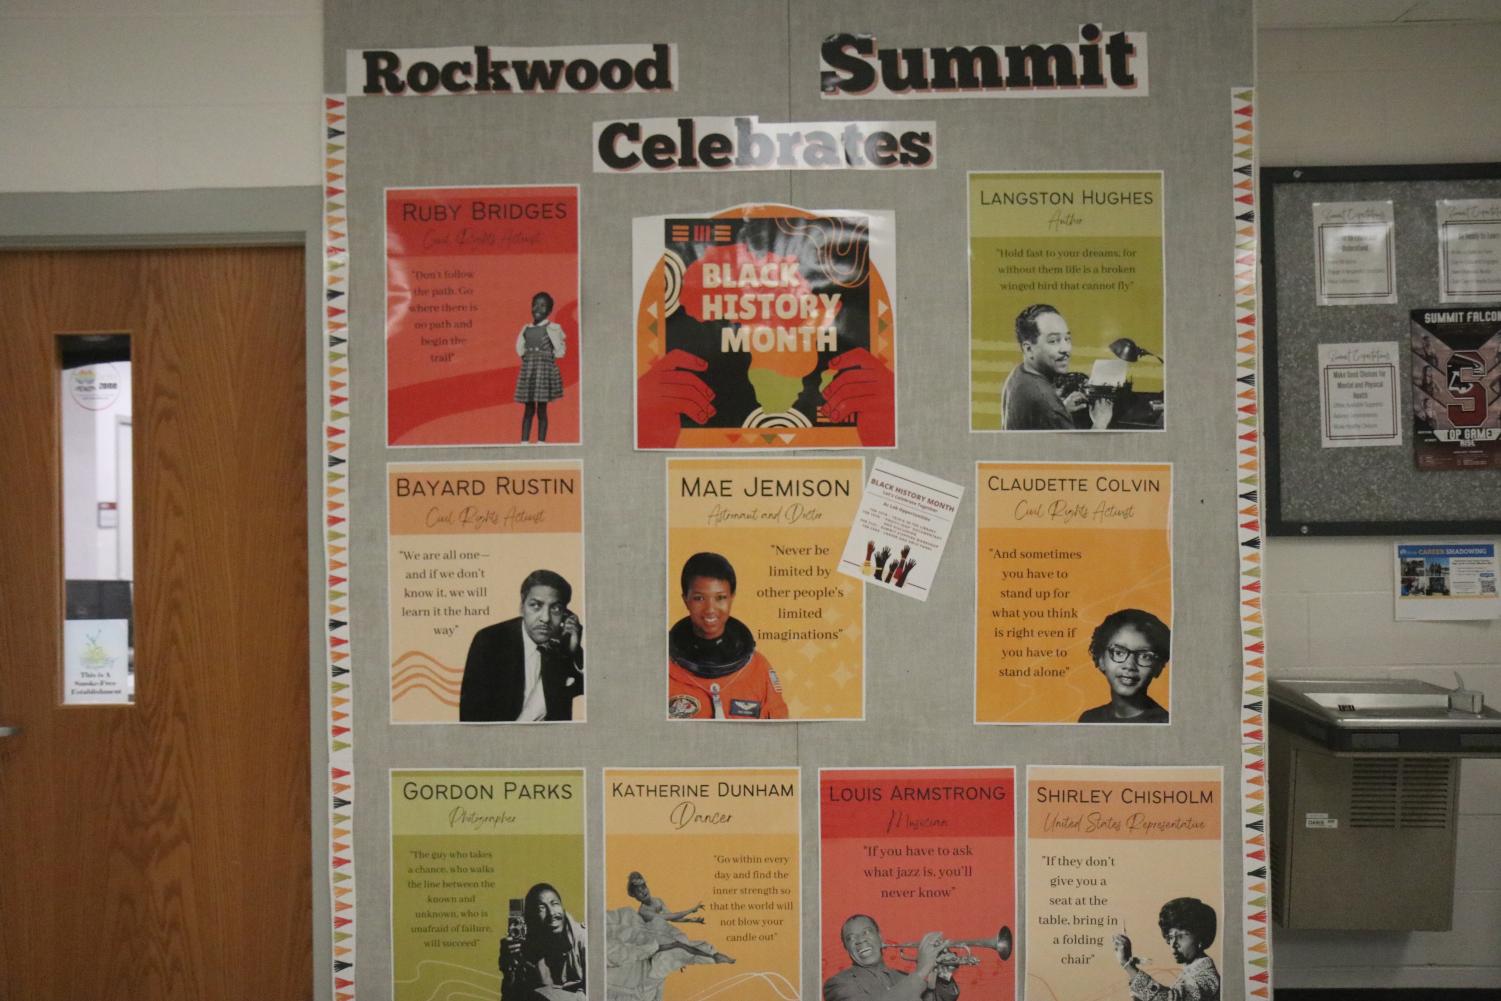 Displays outside the nurses office show
black historical figures. The posters have a photo of each person and one of their popular quotes.